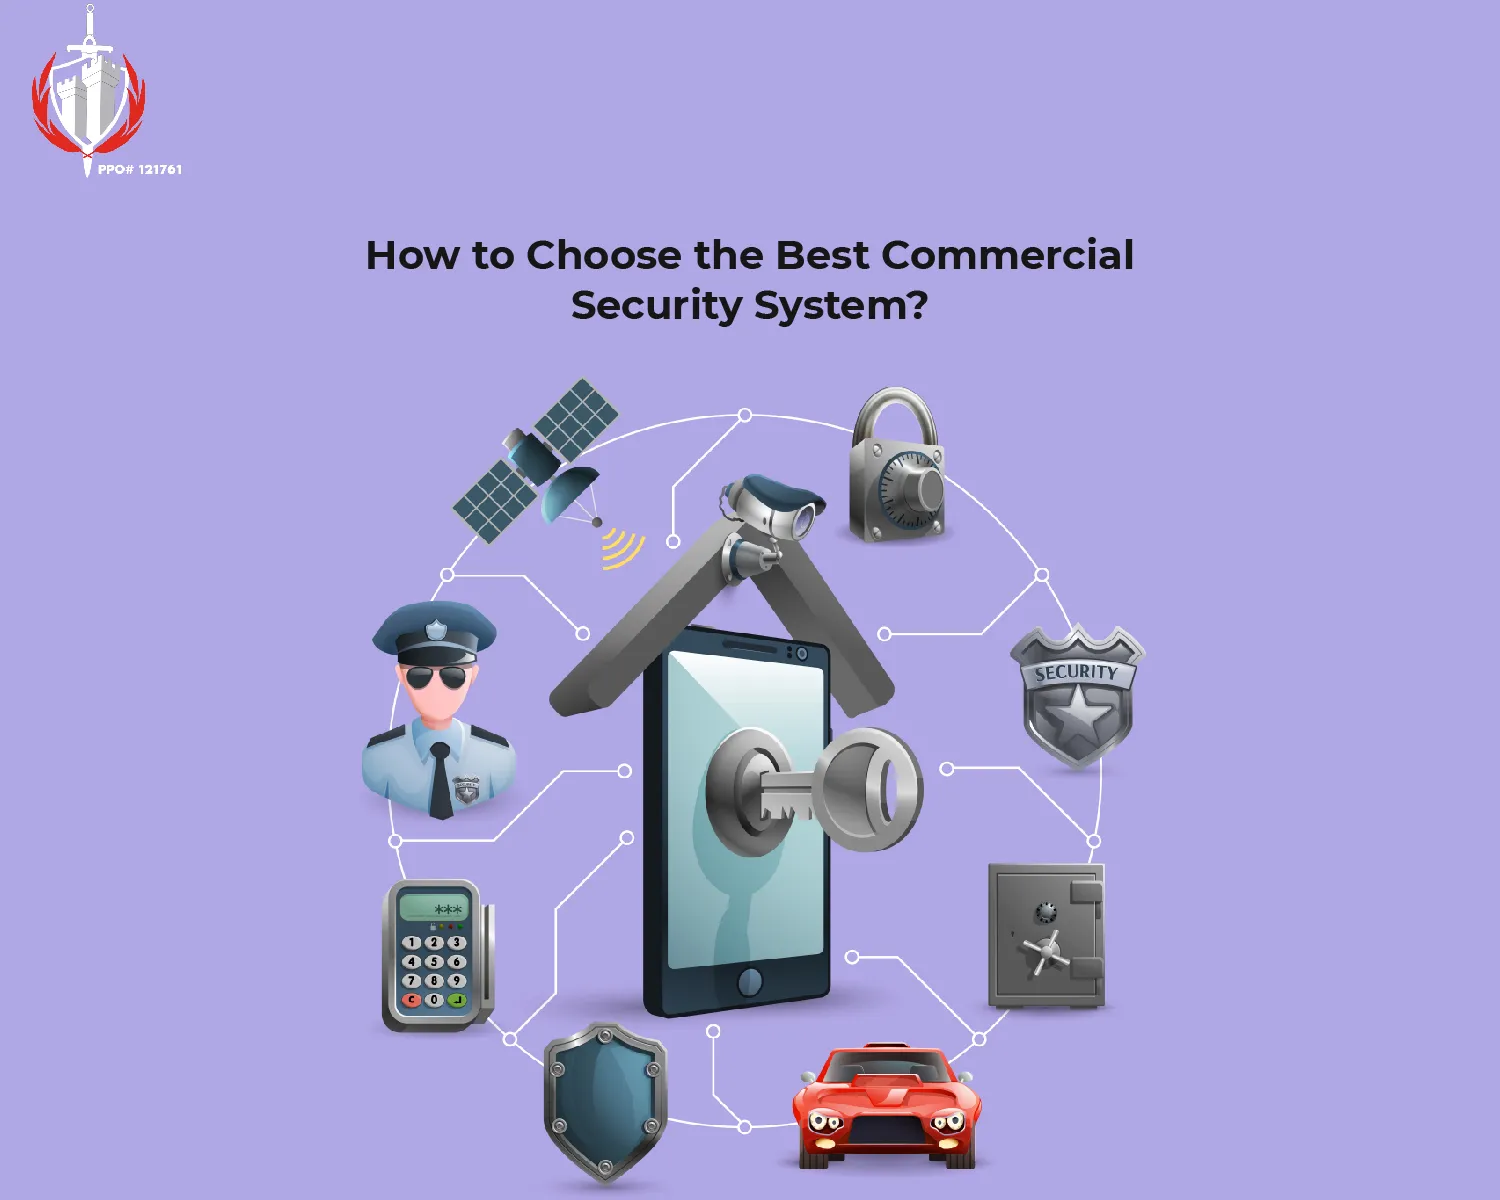 How to Choose the Best Commercial Security System?